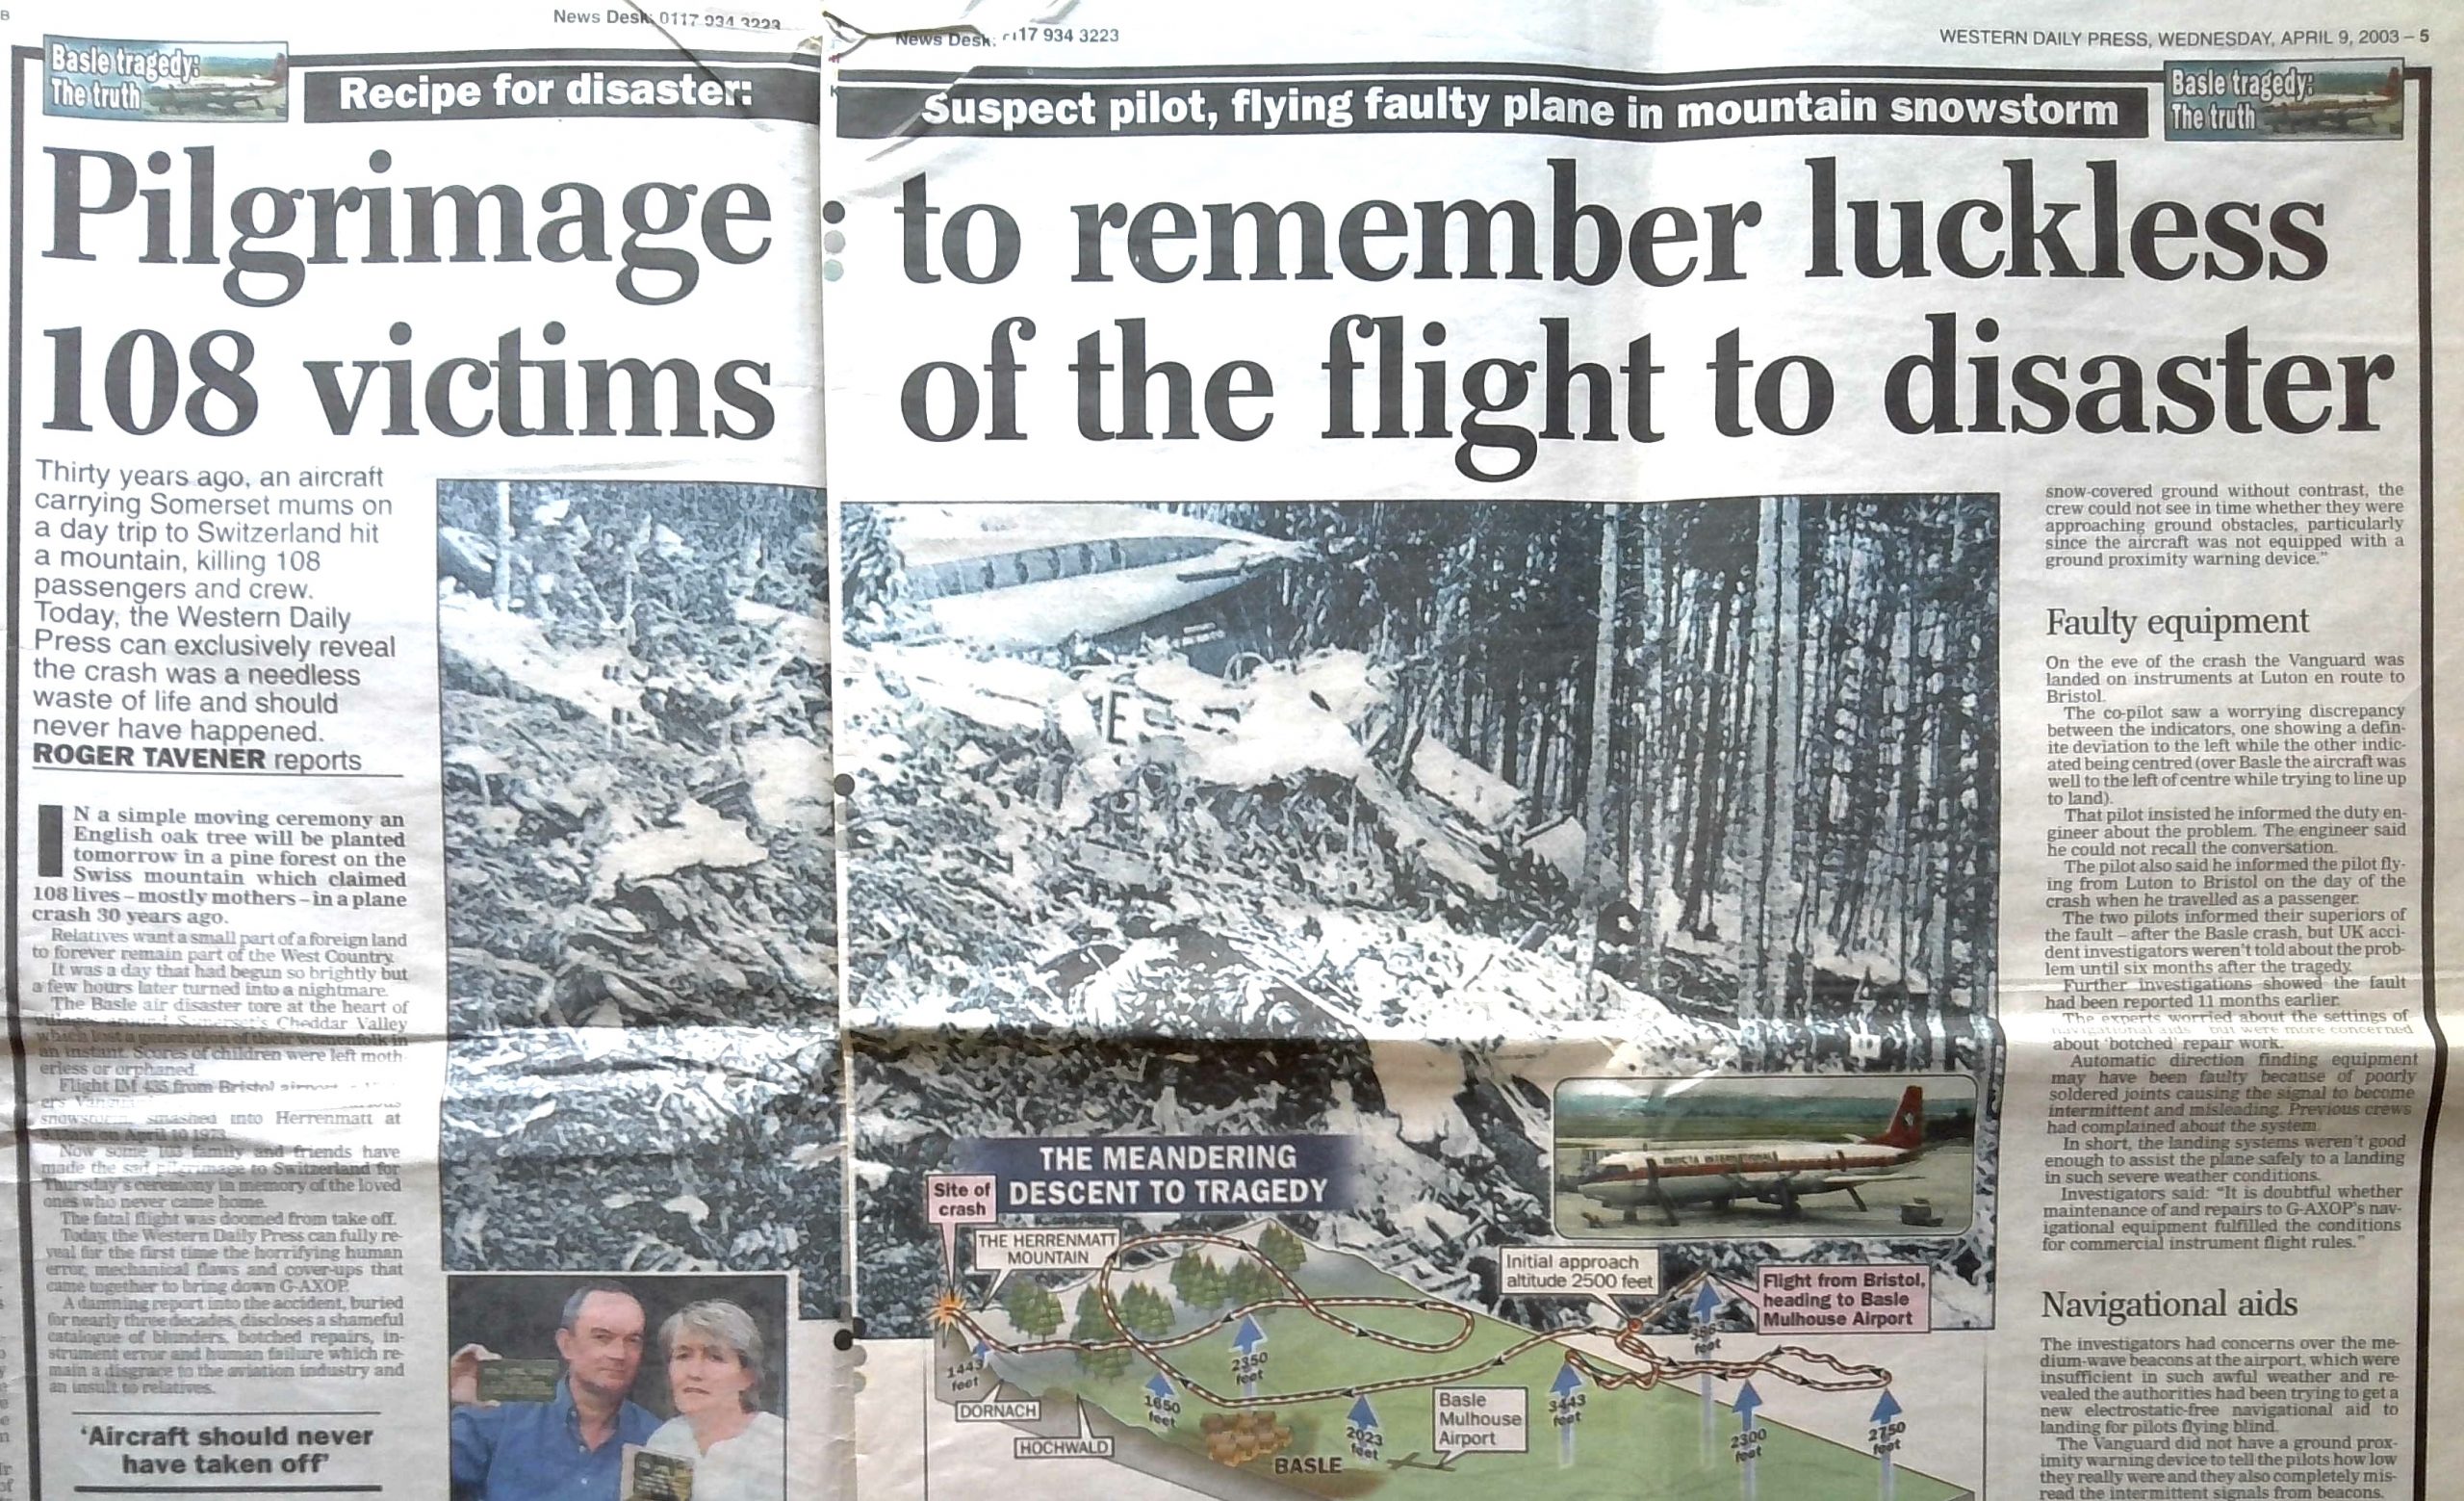 Pilgrimage to remember luckless 108 victims of the flight to disaster